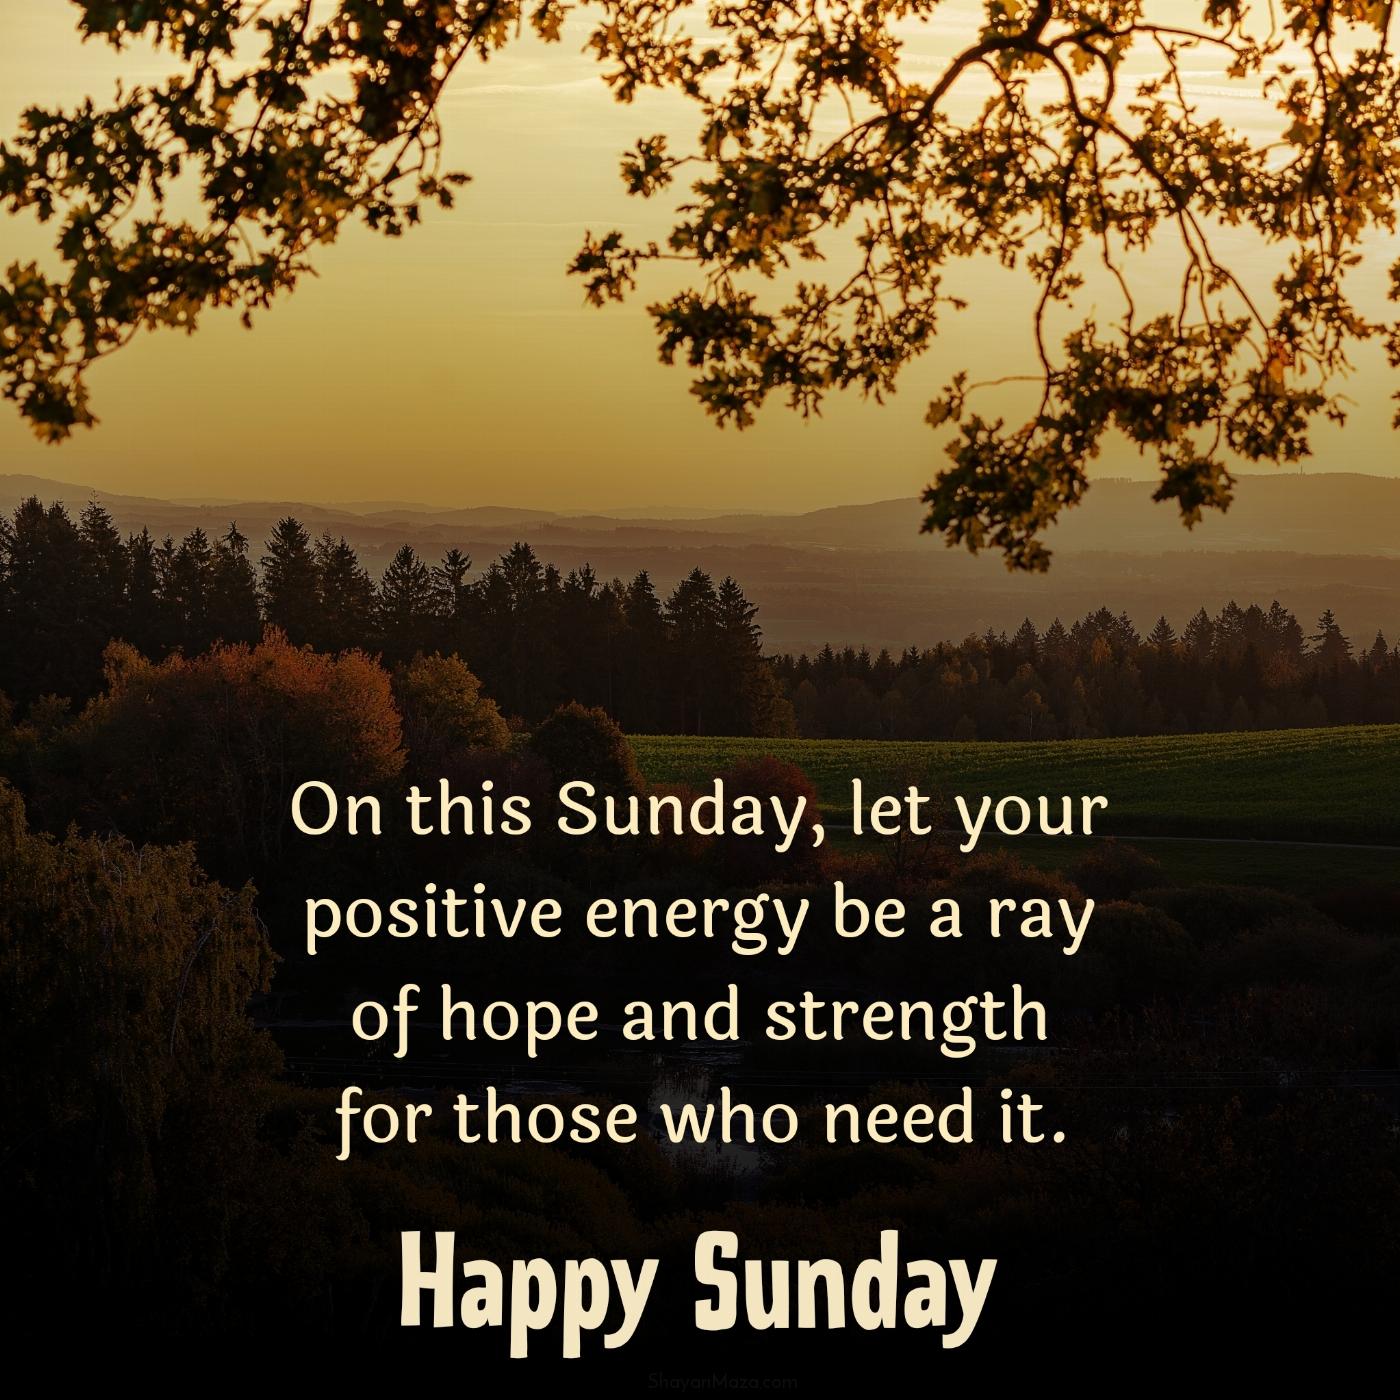 On this Sunday let your positive energy be a ray of hope